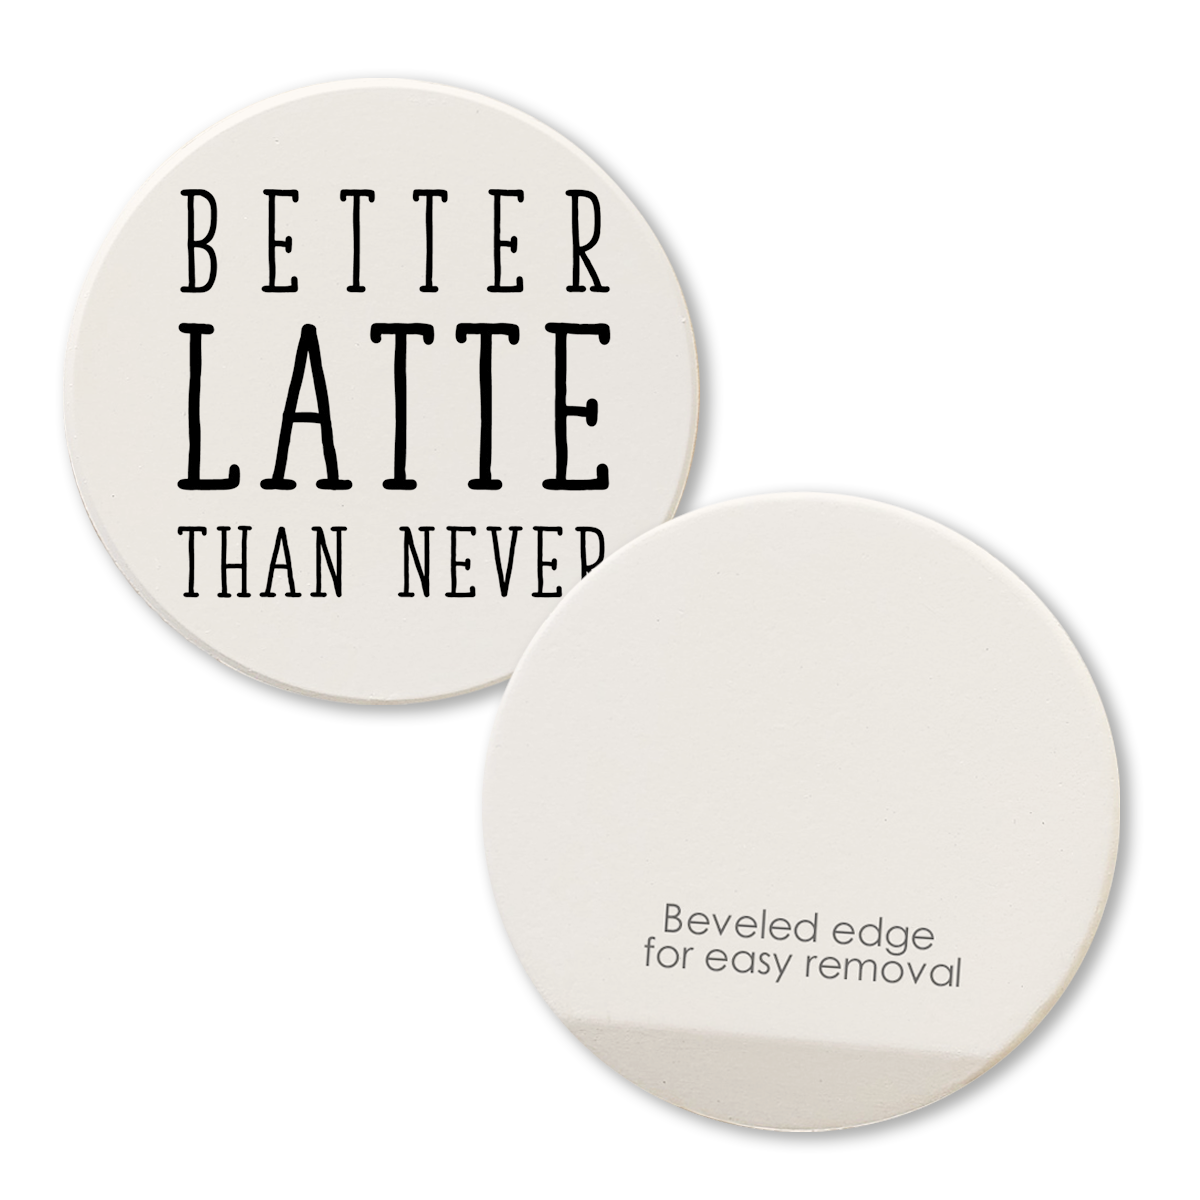 Car Coaster Better Latte Than Never  Tipsy Coasters & Gifts   